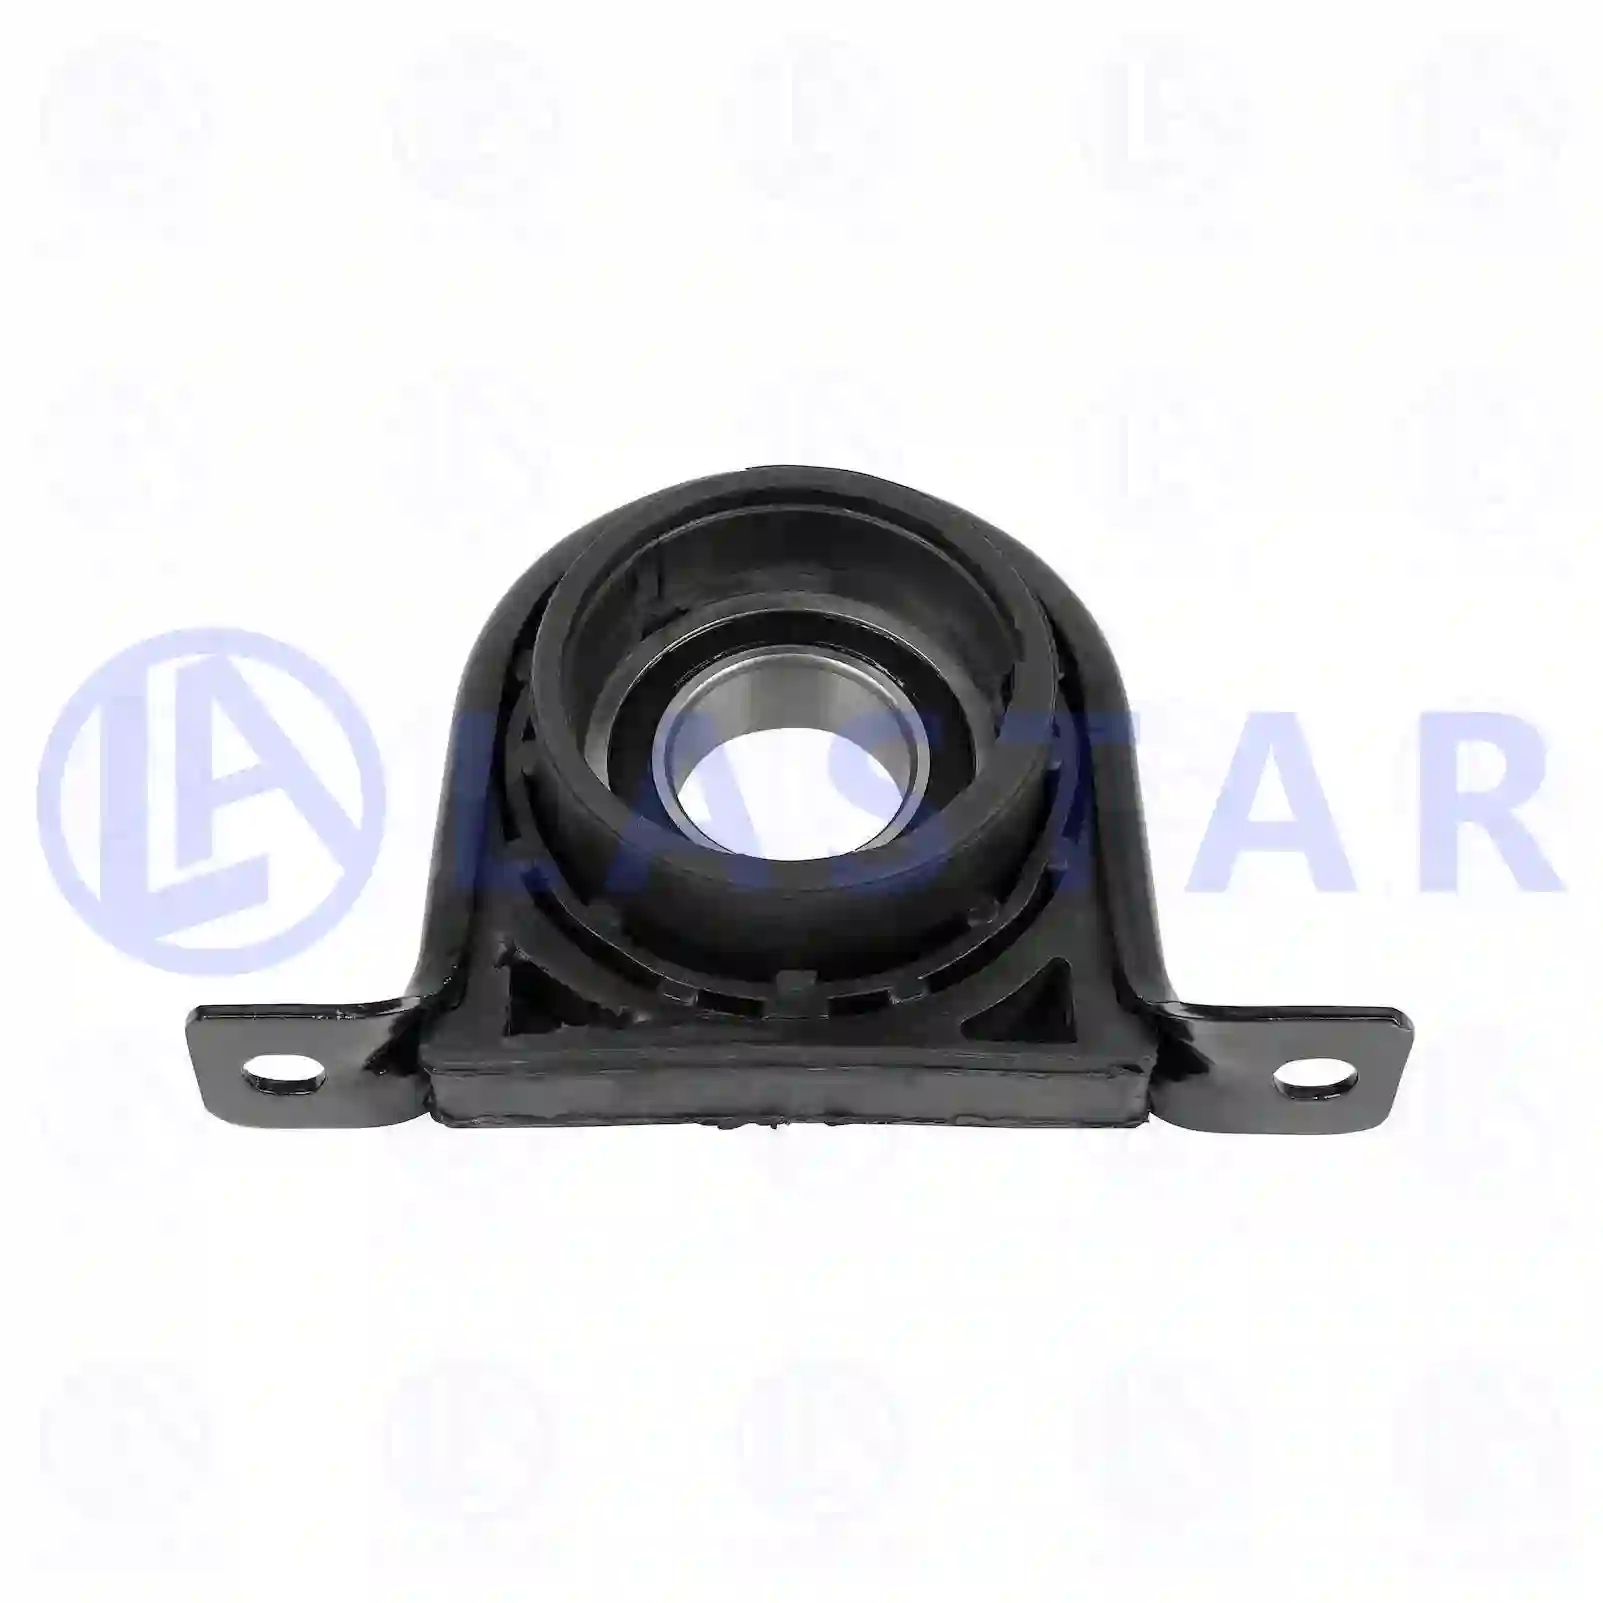 Support Bearing Center bearing, la no: 77734113 ,  oem no:42535254, 42535254, 42554407, 42561251, ZG02510-0008 Lastar Spare Part | Truck Spare Parts, Auotomotive Spare Parts